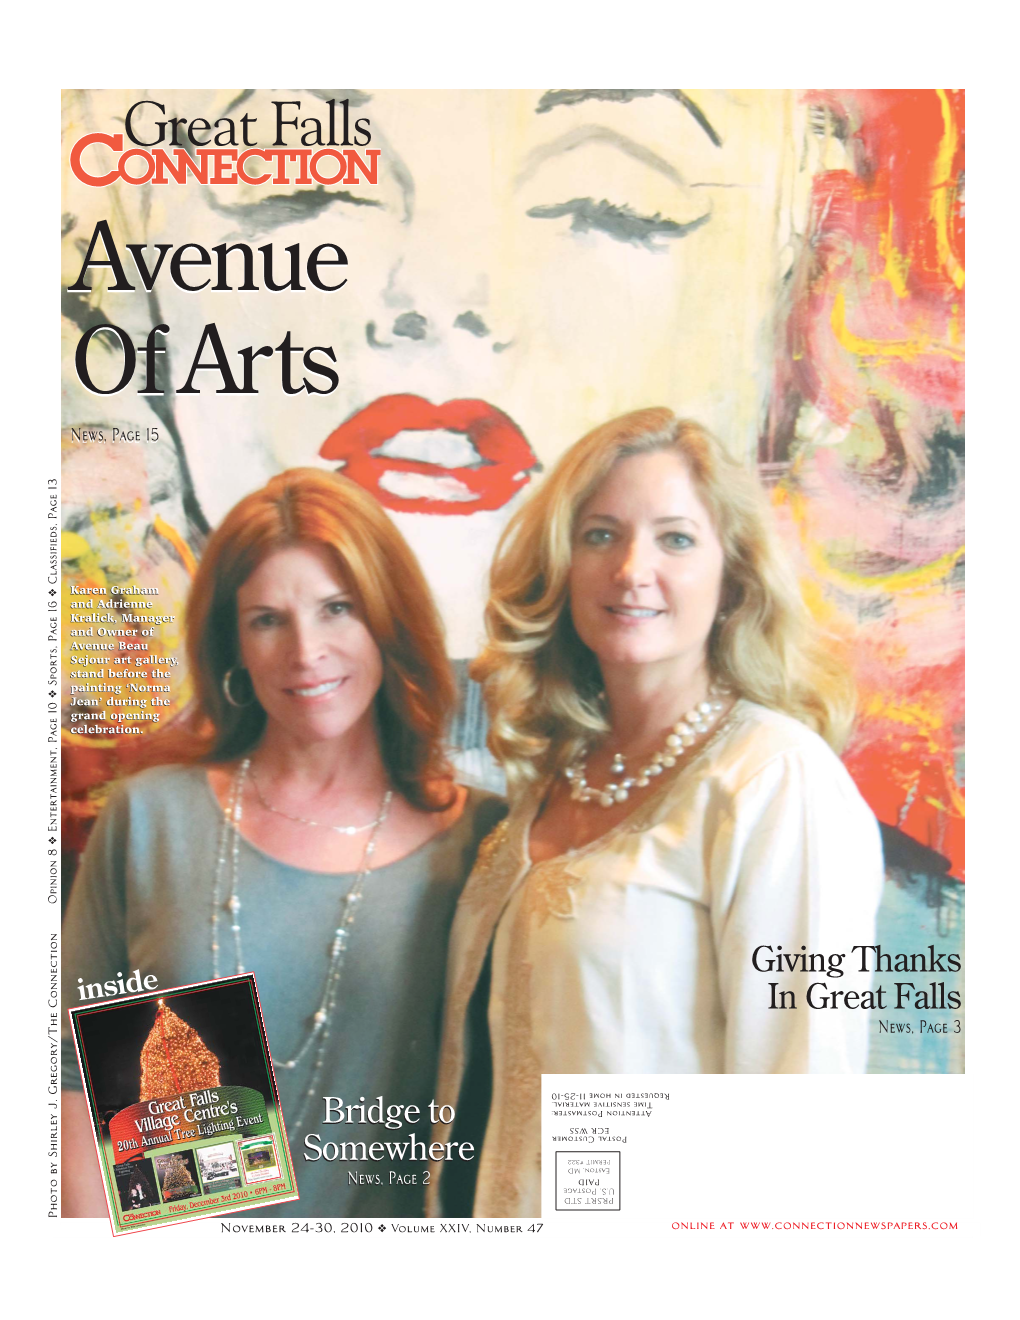 Great Falls Avenue of Arts News, Page 15